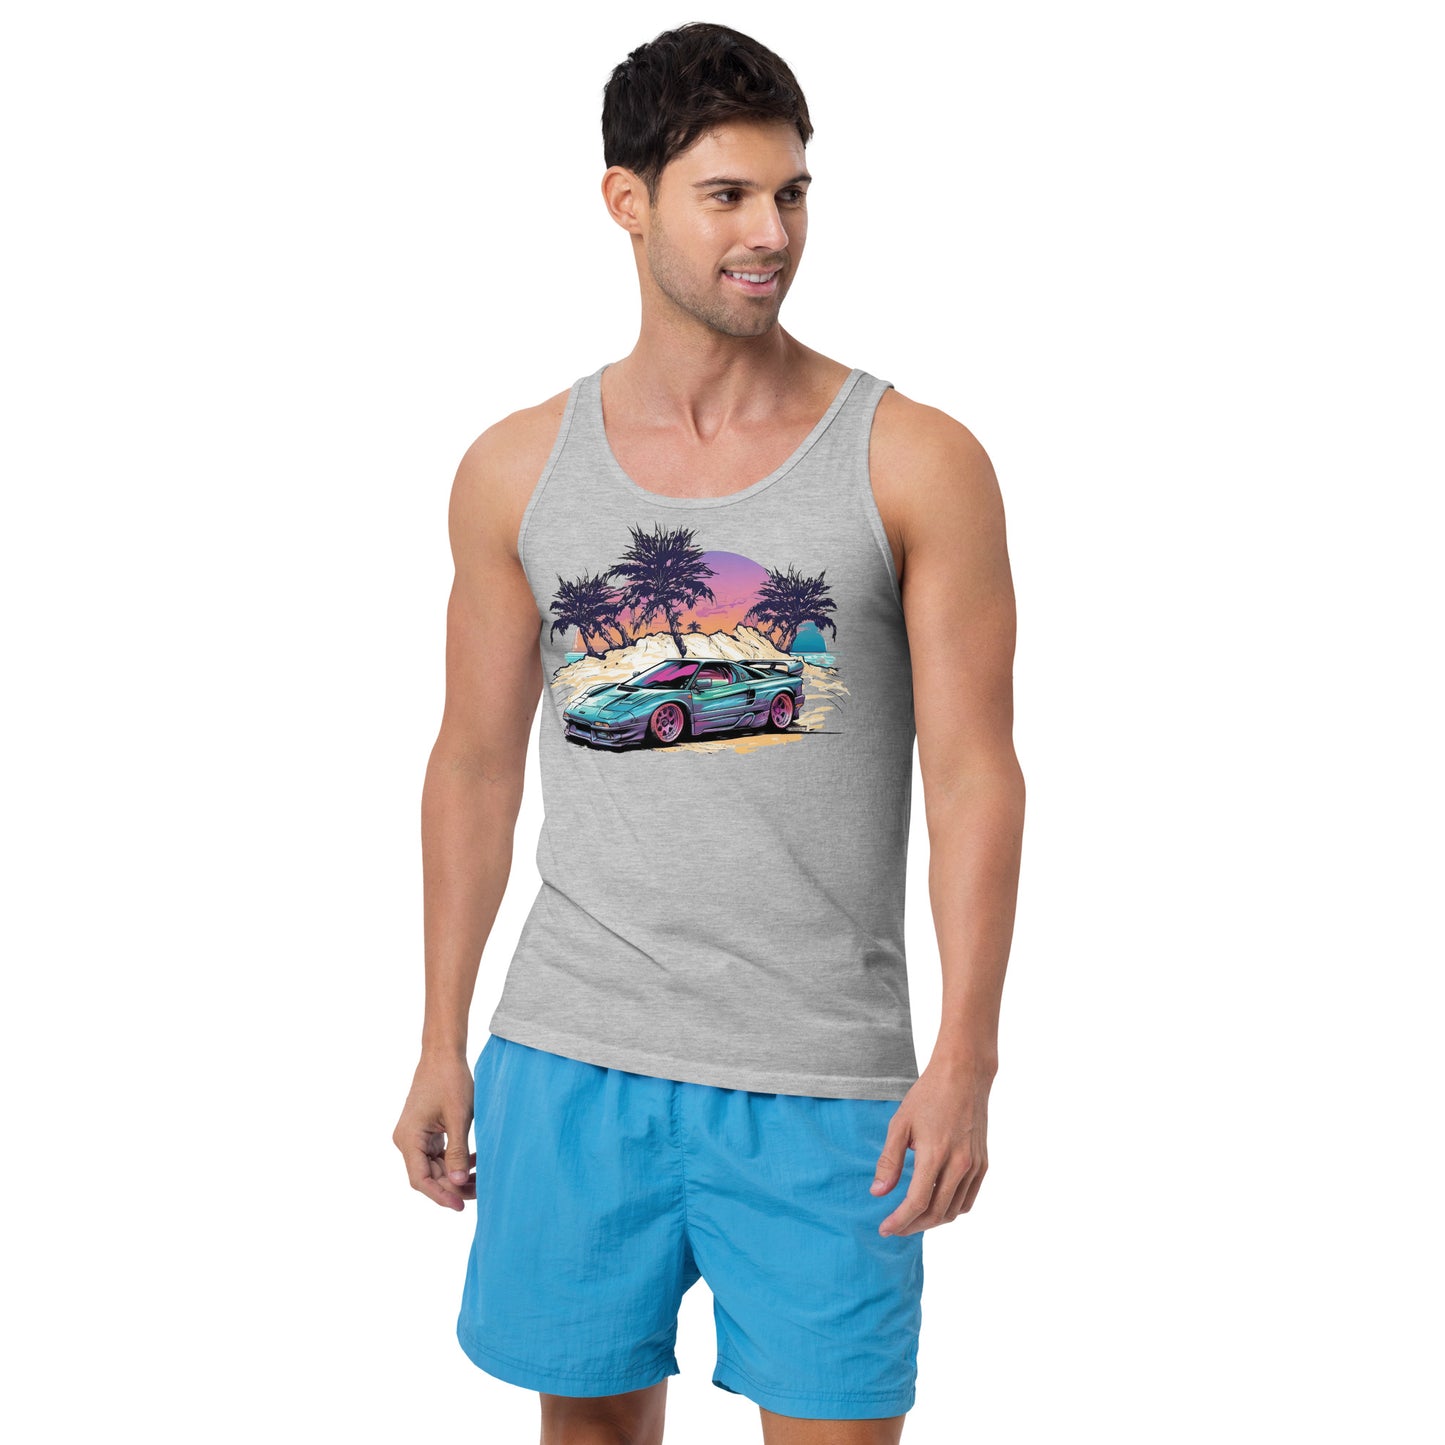 man with grey tank top with picture of vintage car in front of palm trees 